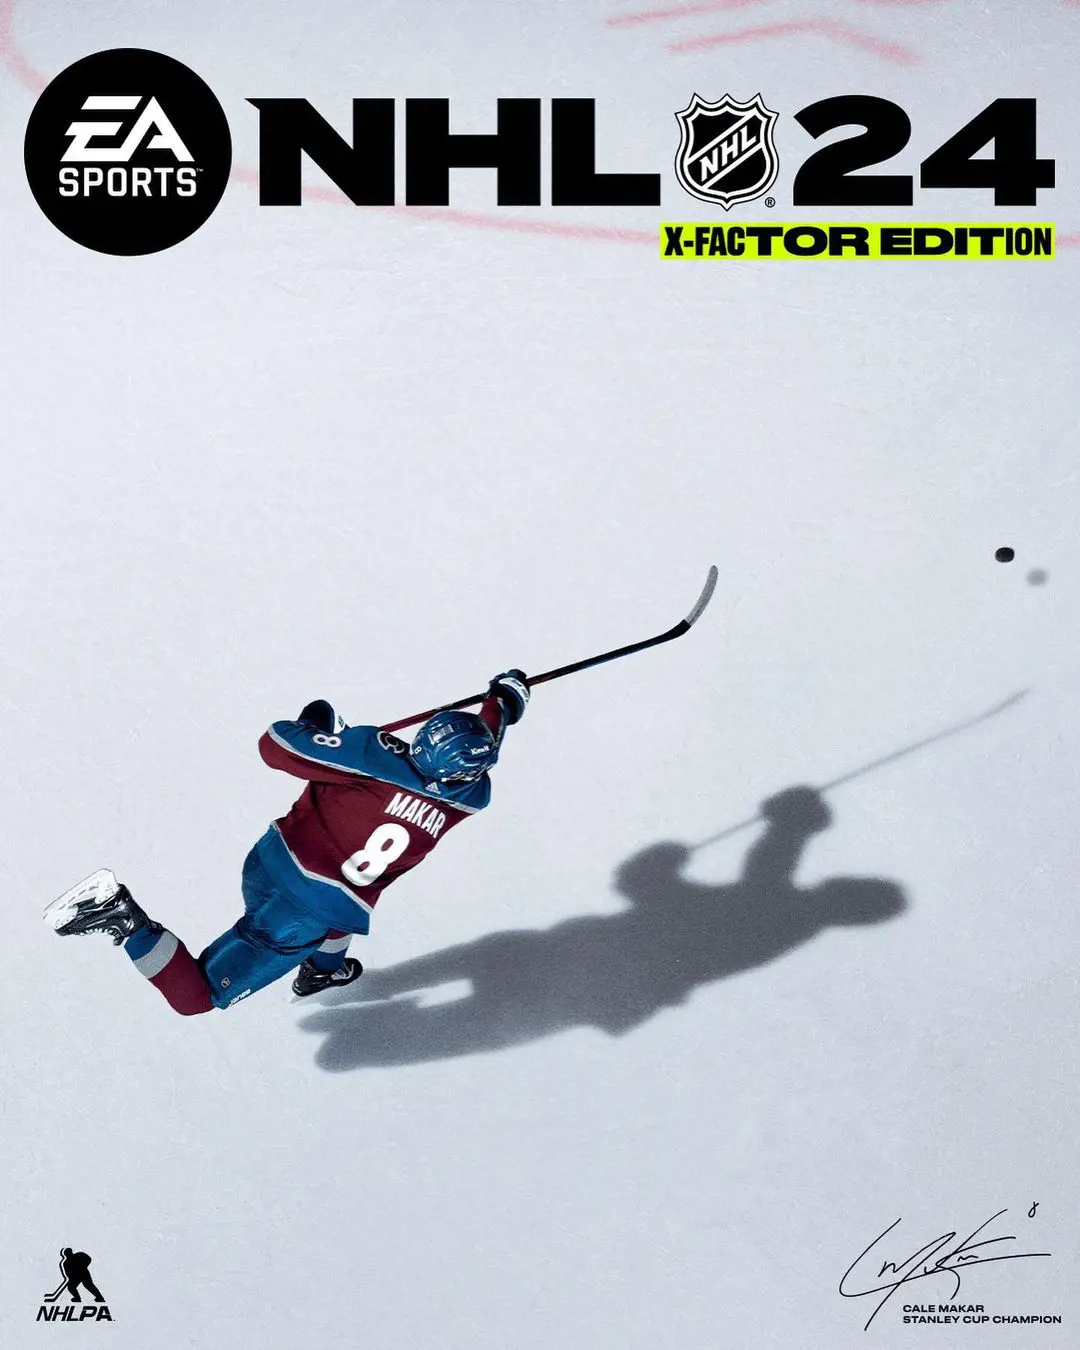 The X-Factor edition of Makar in the NHL 24 